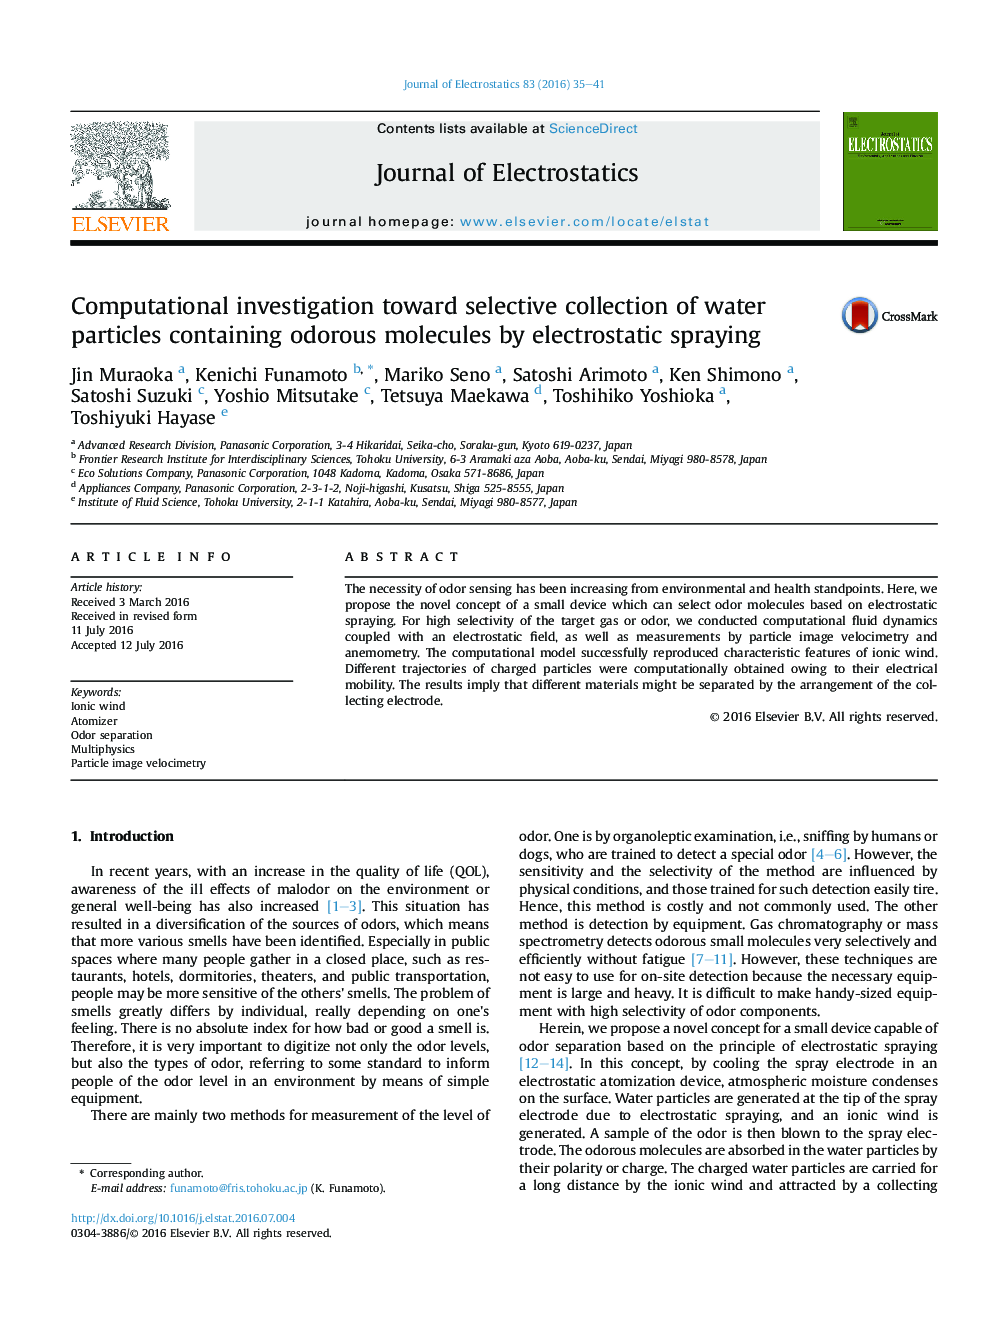 Computational investigation toward selective collection of water particles containing odorous molecules by electrostatic spraying